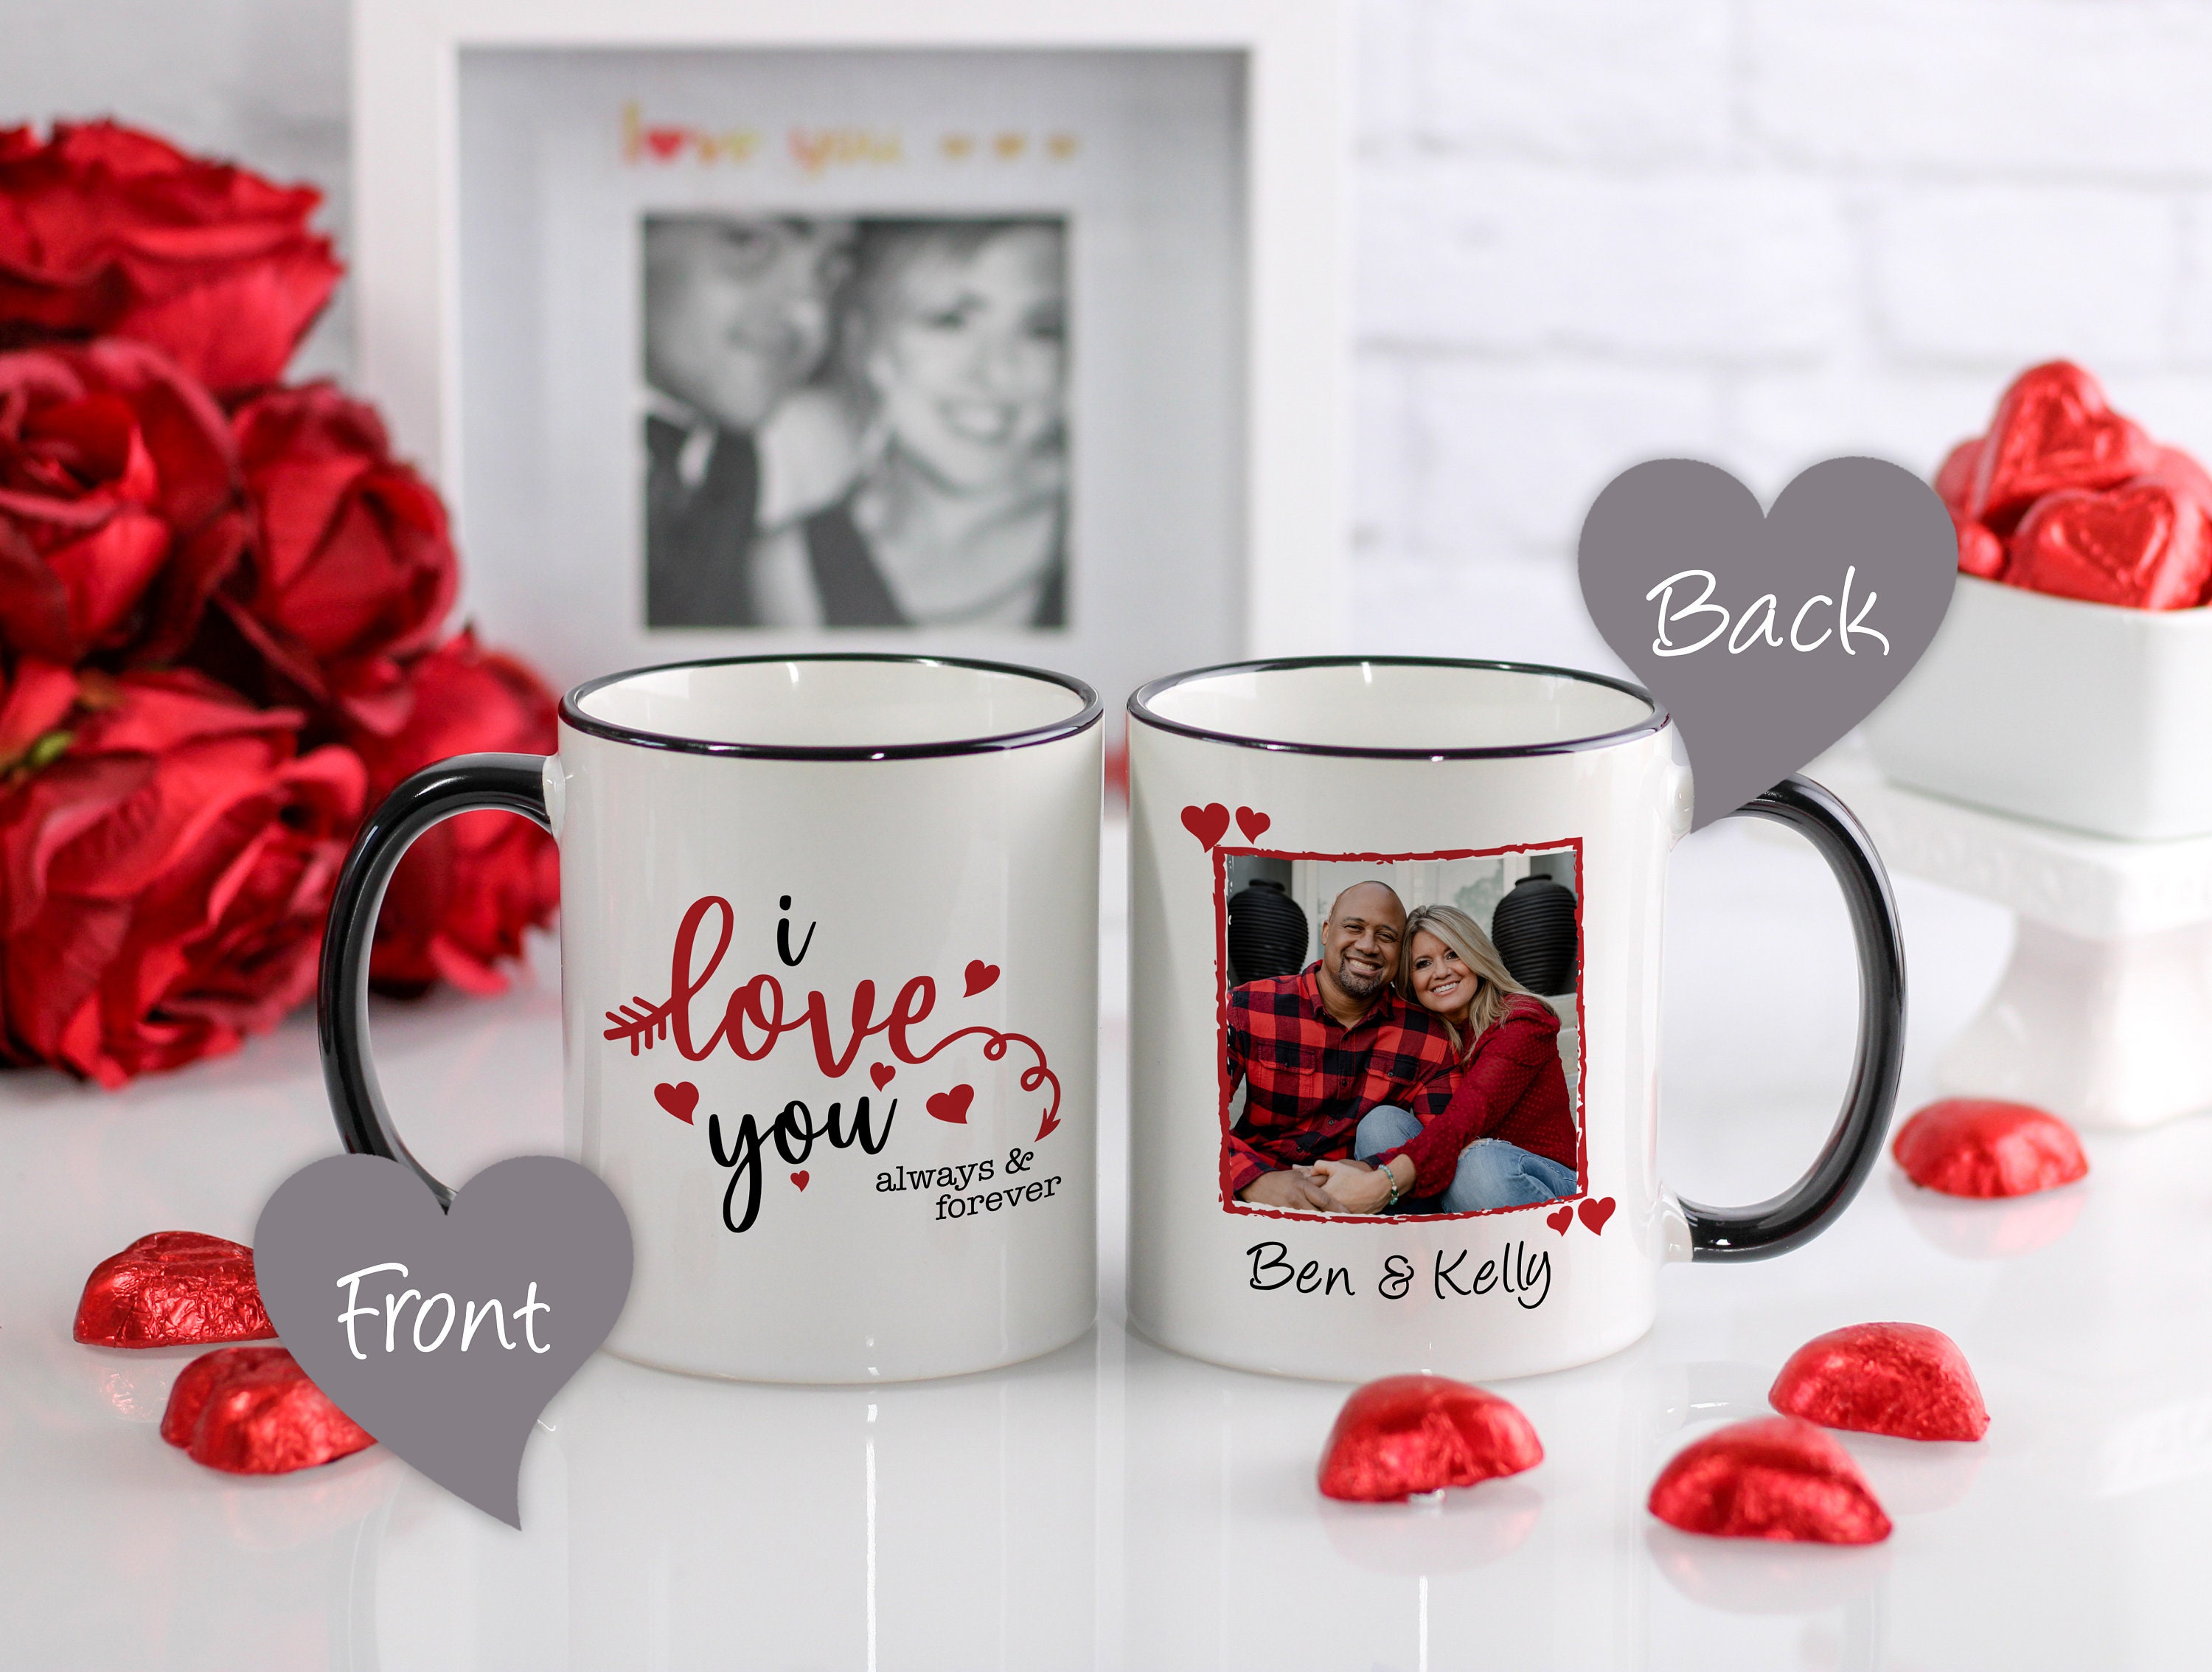 Happy Valentines Day My Love Tea Coffee Cup Love Mug Gift Idea For Him Her